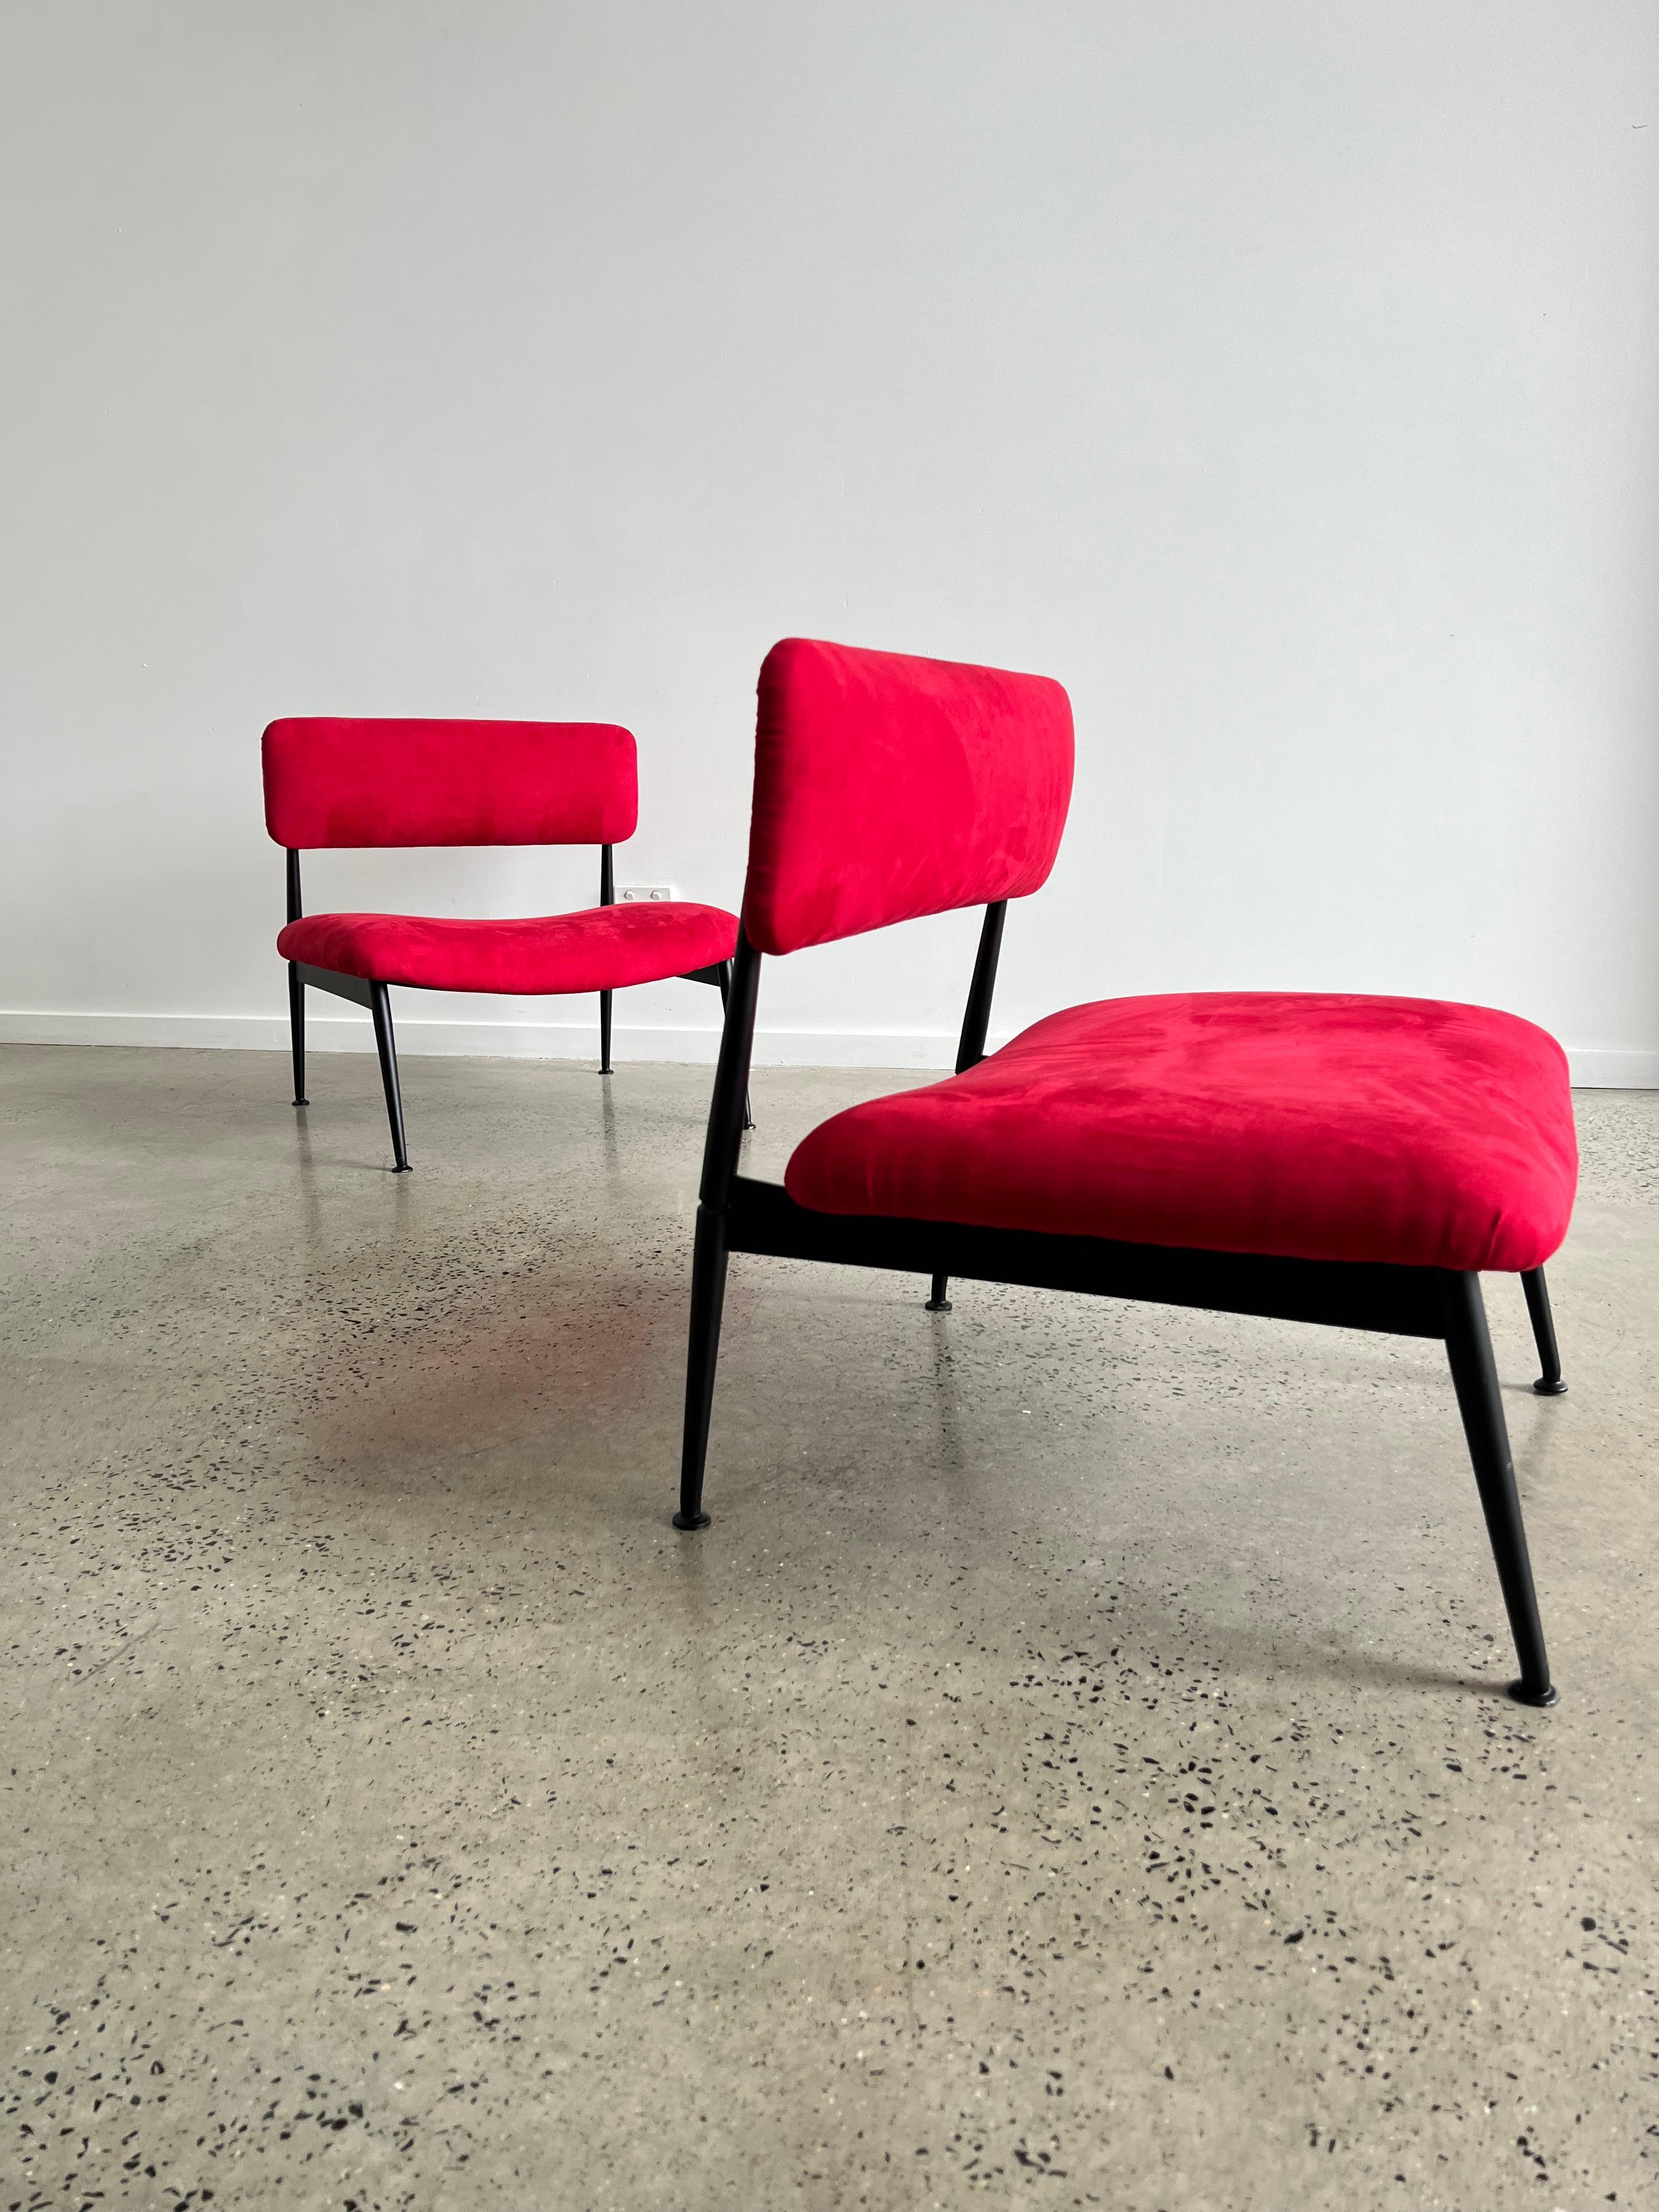 Late 20th Century Italian Mid-Century Chairs in Suede and Black Metal Frame